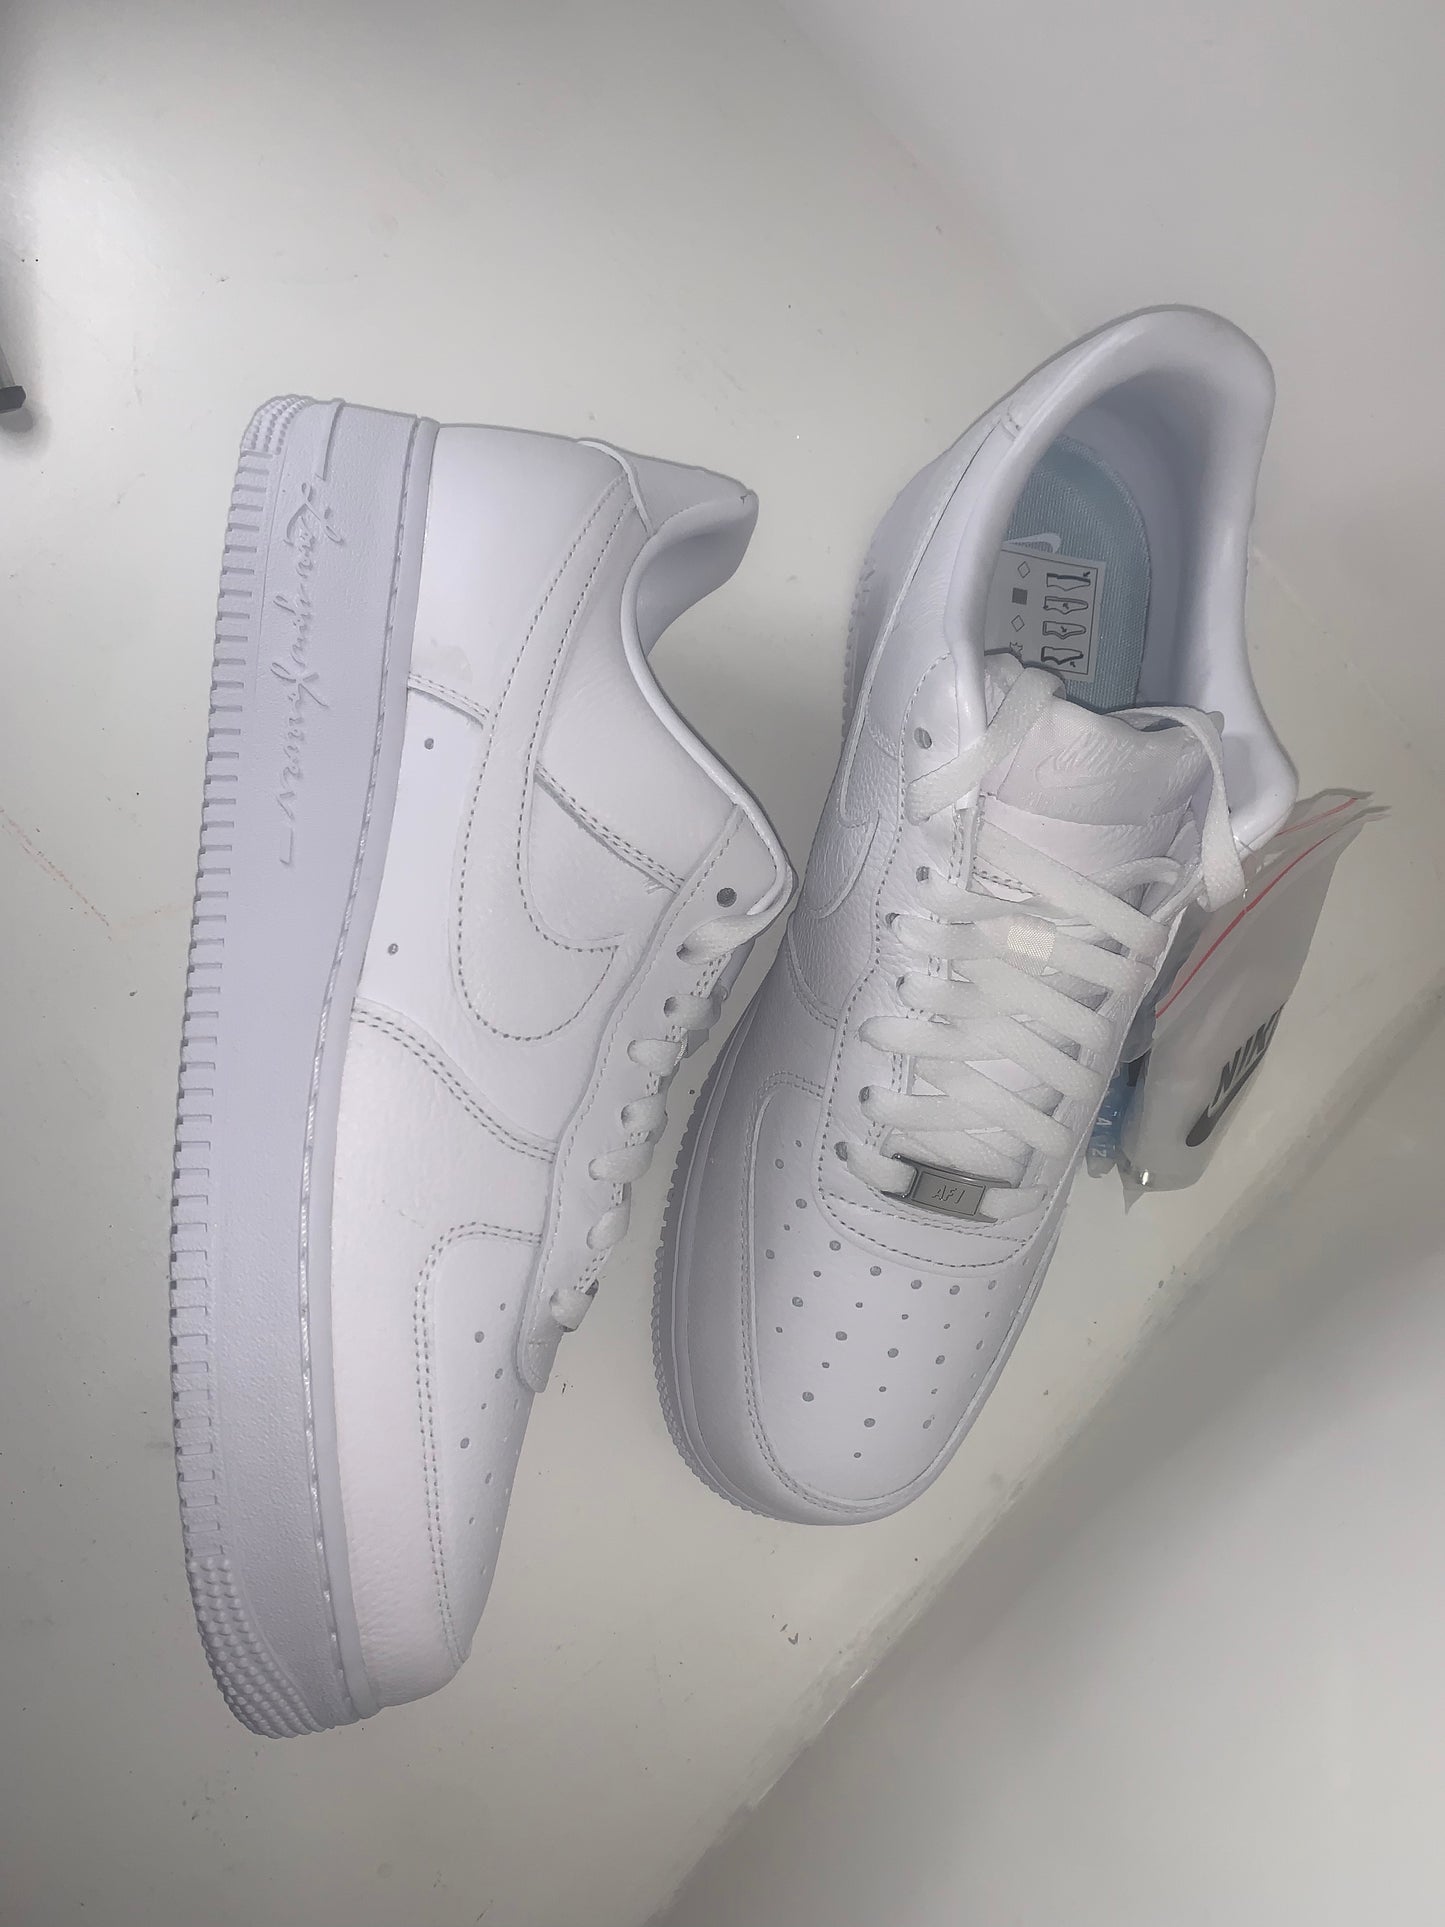 NIKE AIR FORCE 1 LOW X NOCTA CERTIFIED LOVER BOY